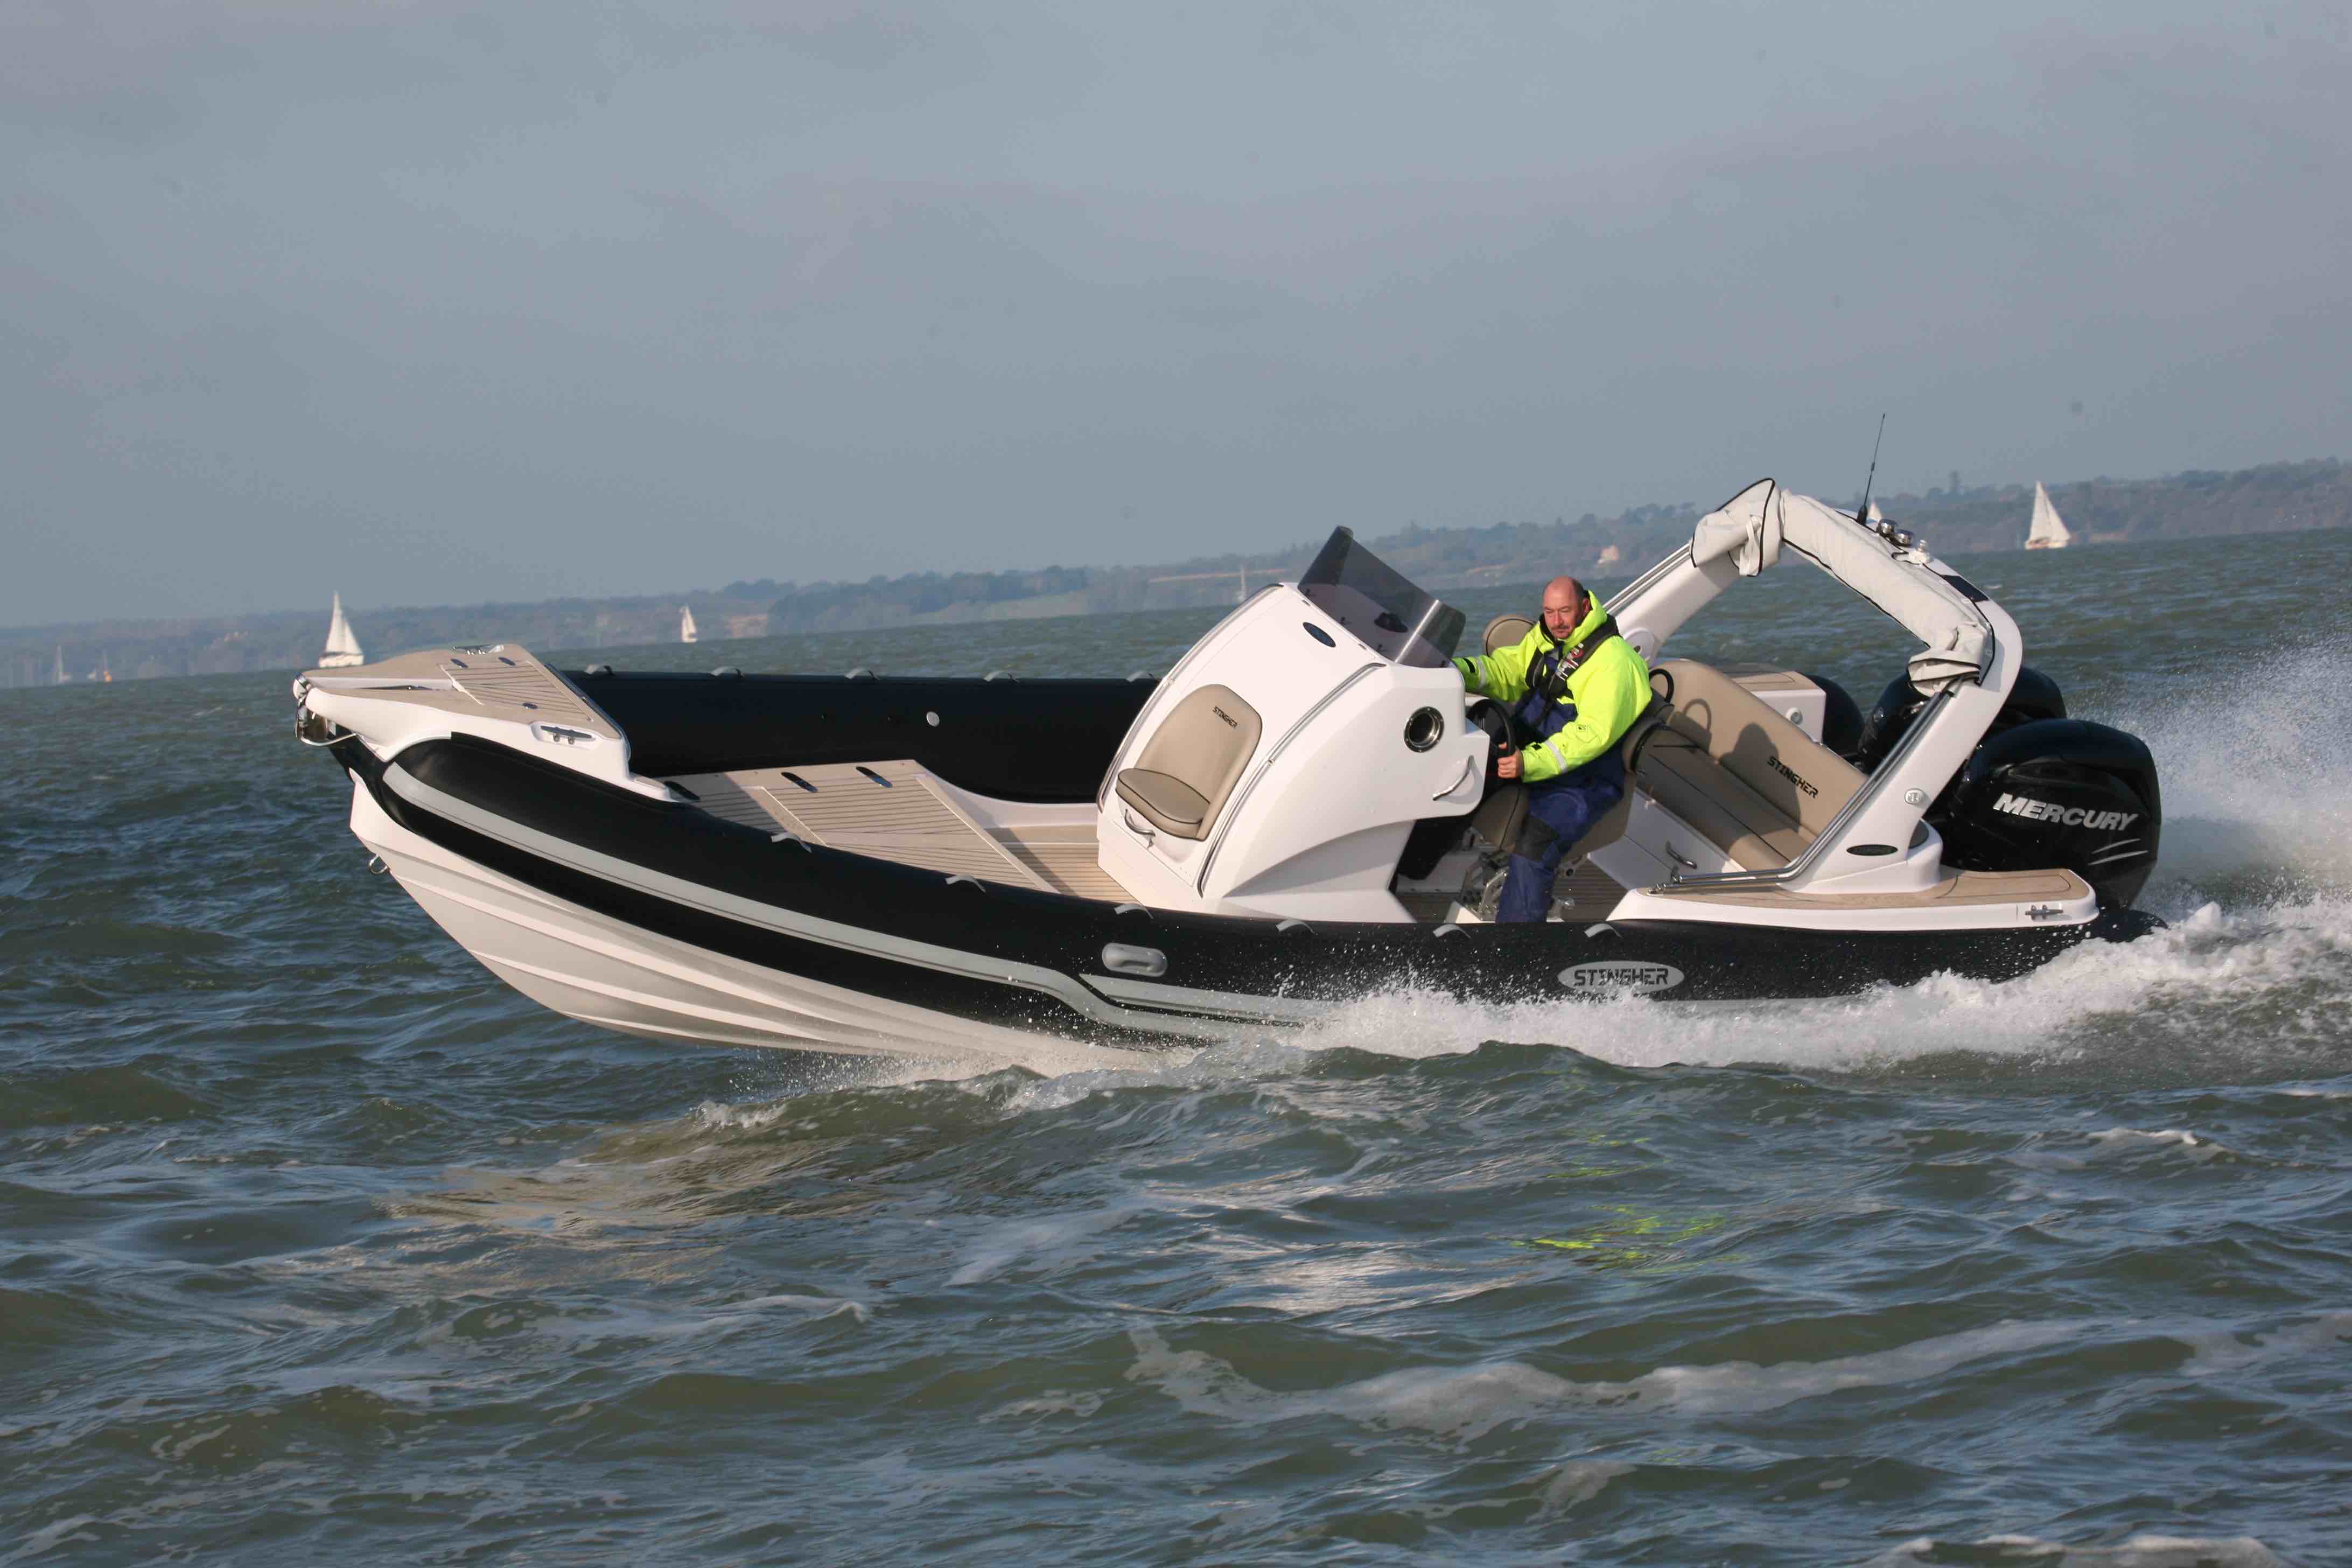 The twin-engined Stingher 800 is radically rapid but very user-friendly